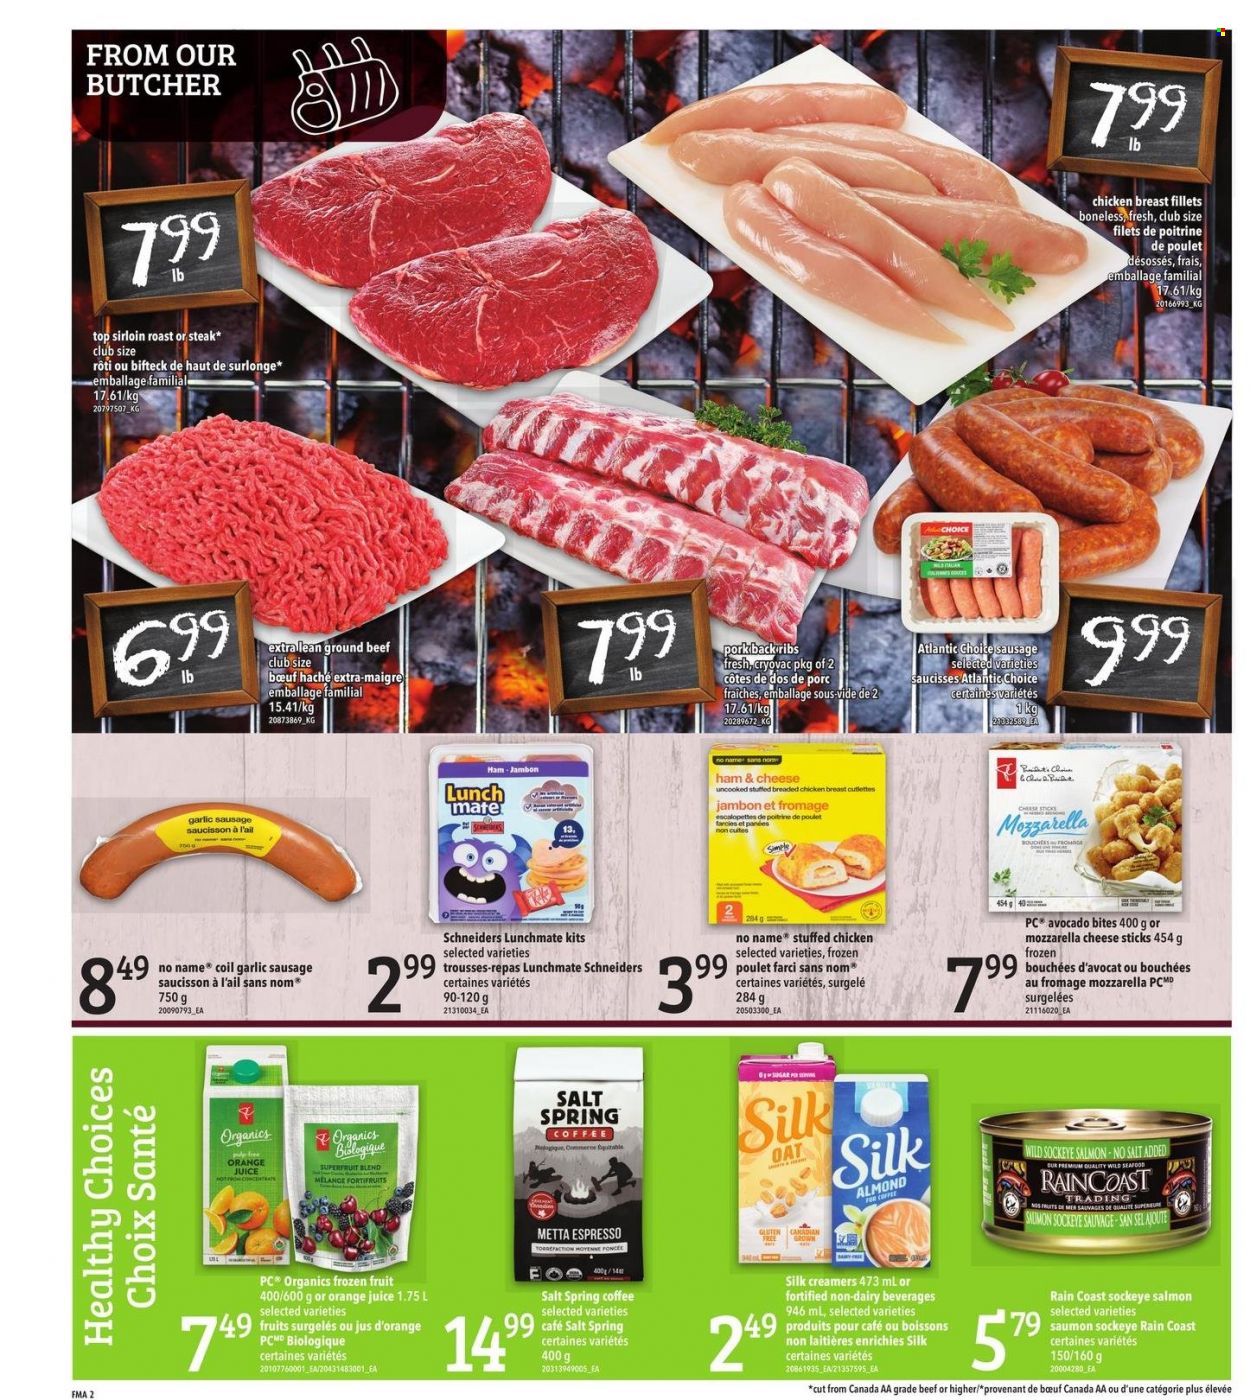 thumbnail - Freshmart Flyer - May 12, 2022 - May 18, 2022 - Sales products - garlic, avocado, salmon, seafood, No Name, fried chicken, stuffed chicken, ham, sausage, Silk, cheese sticks, oats, orange juice, juice, chicken, beef meat, ground beef, pork meat, pork ribs, pork back ribs, mozzarella, steak. Page 2.